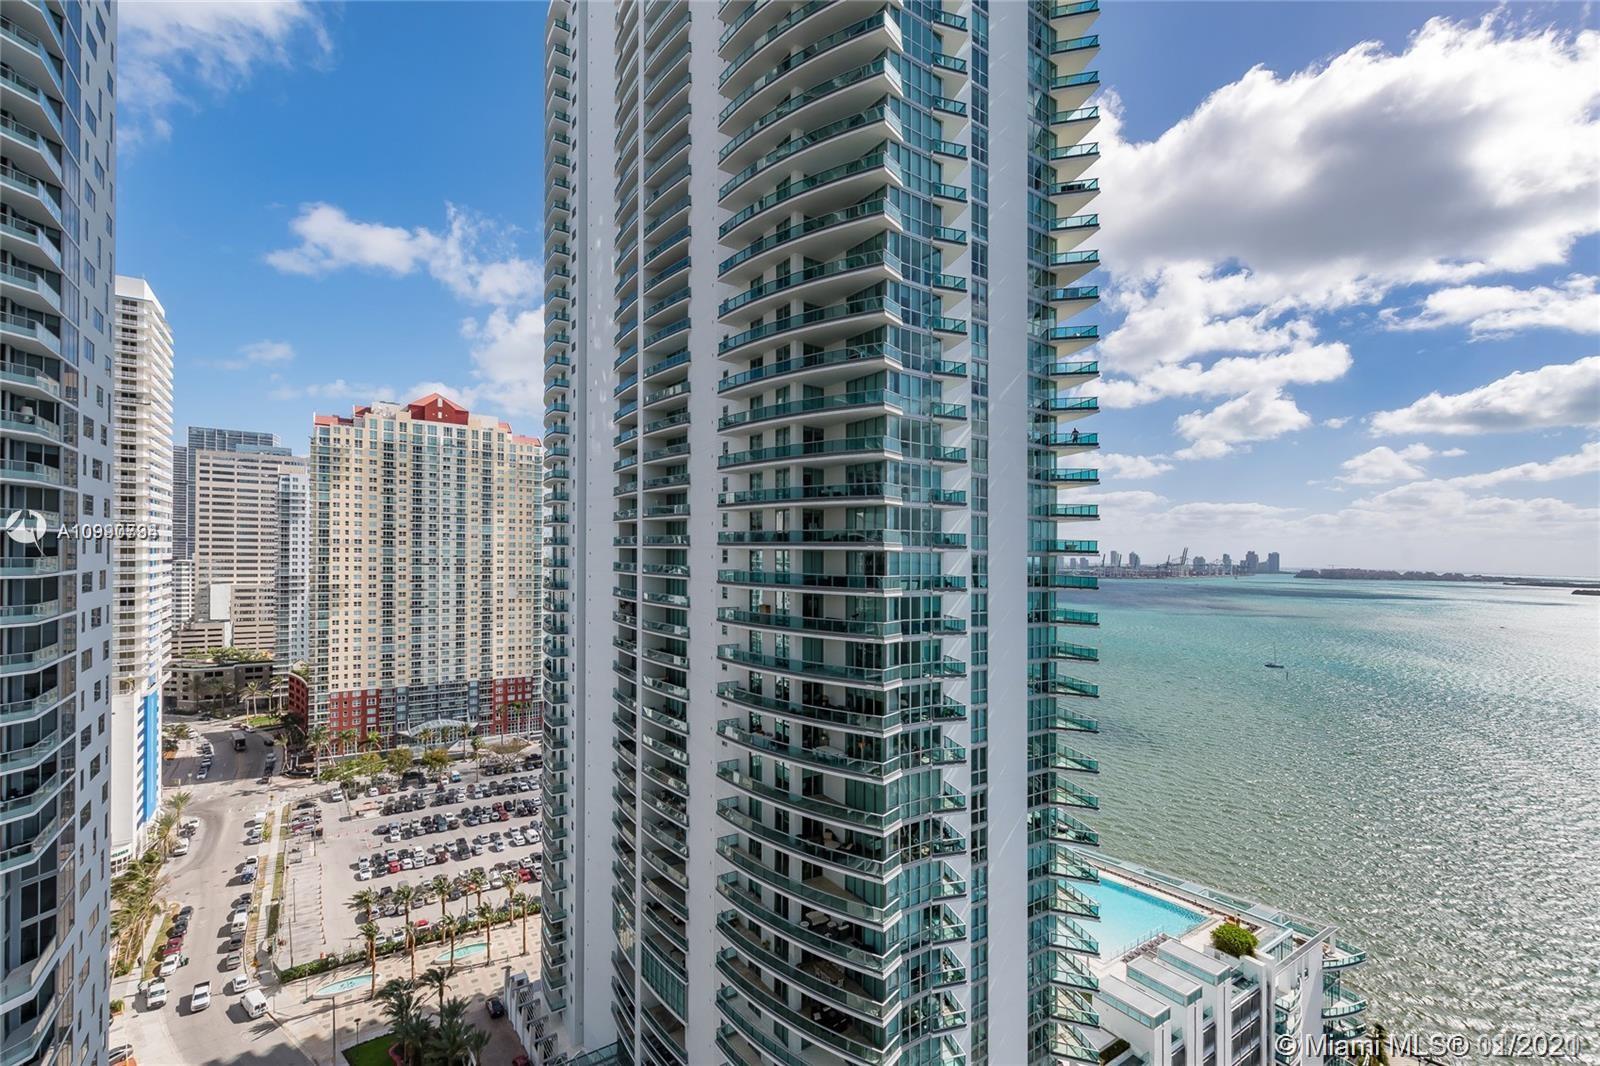 Photo 33 of The Emerald At Brickell Co Apt 1903 in Miami - MLS A10990734